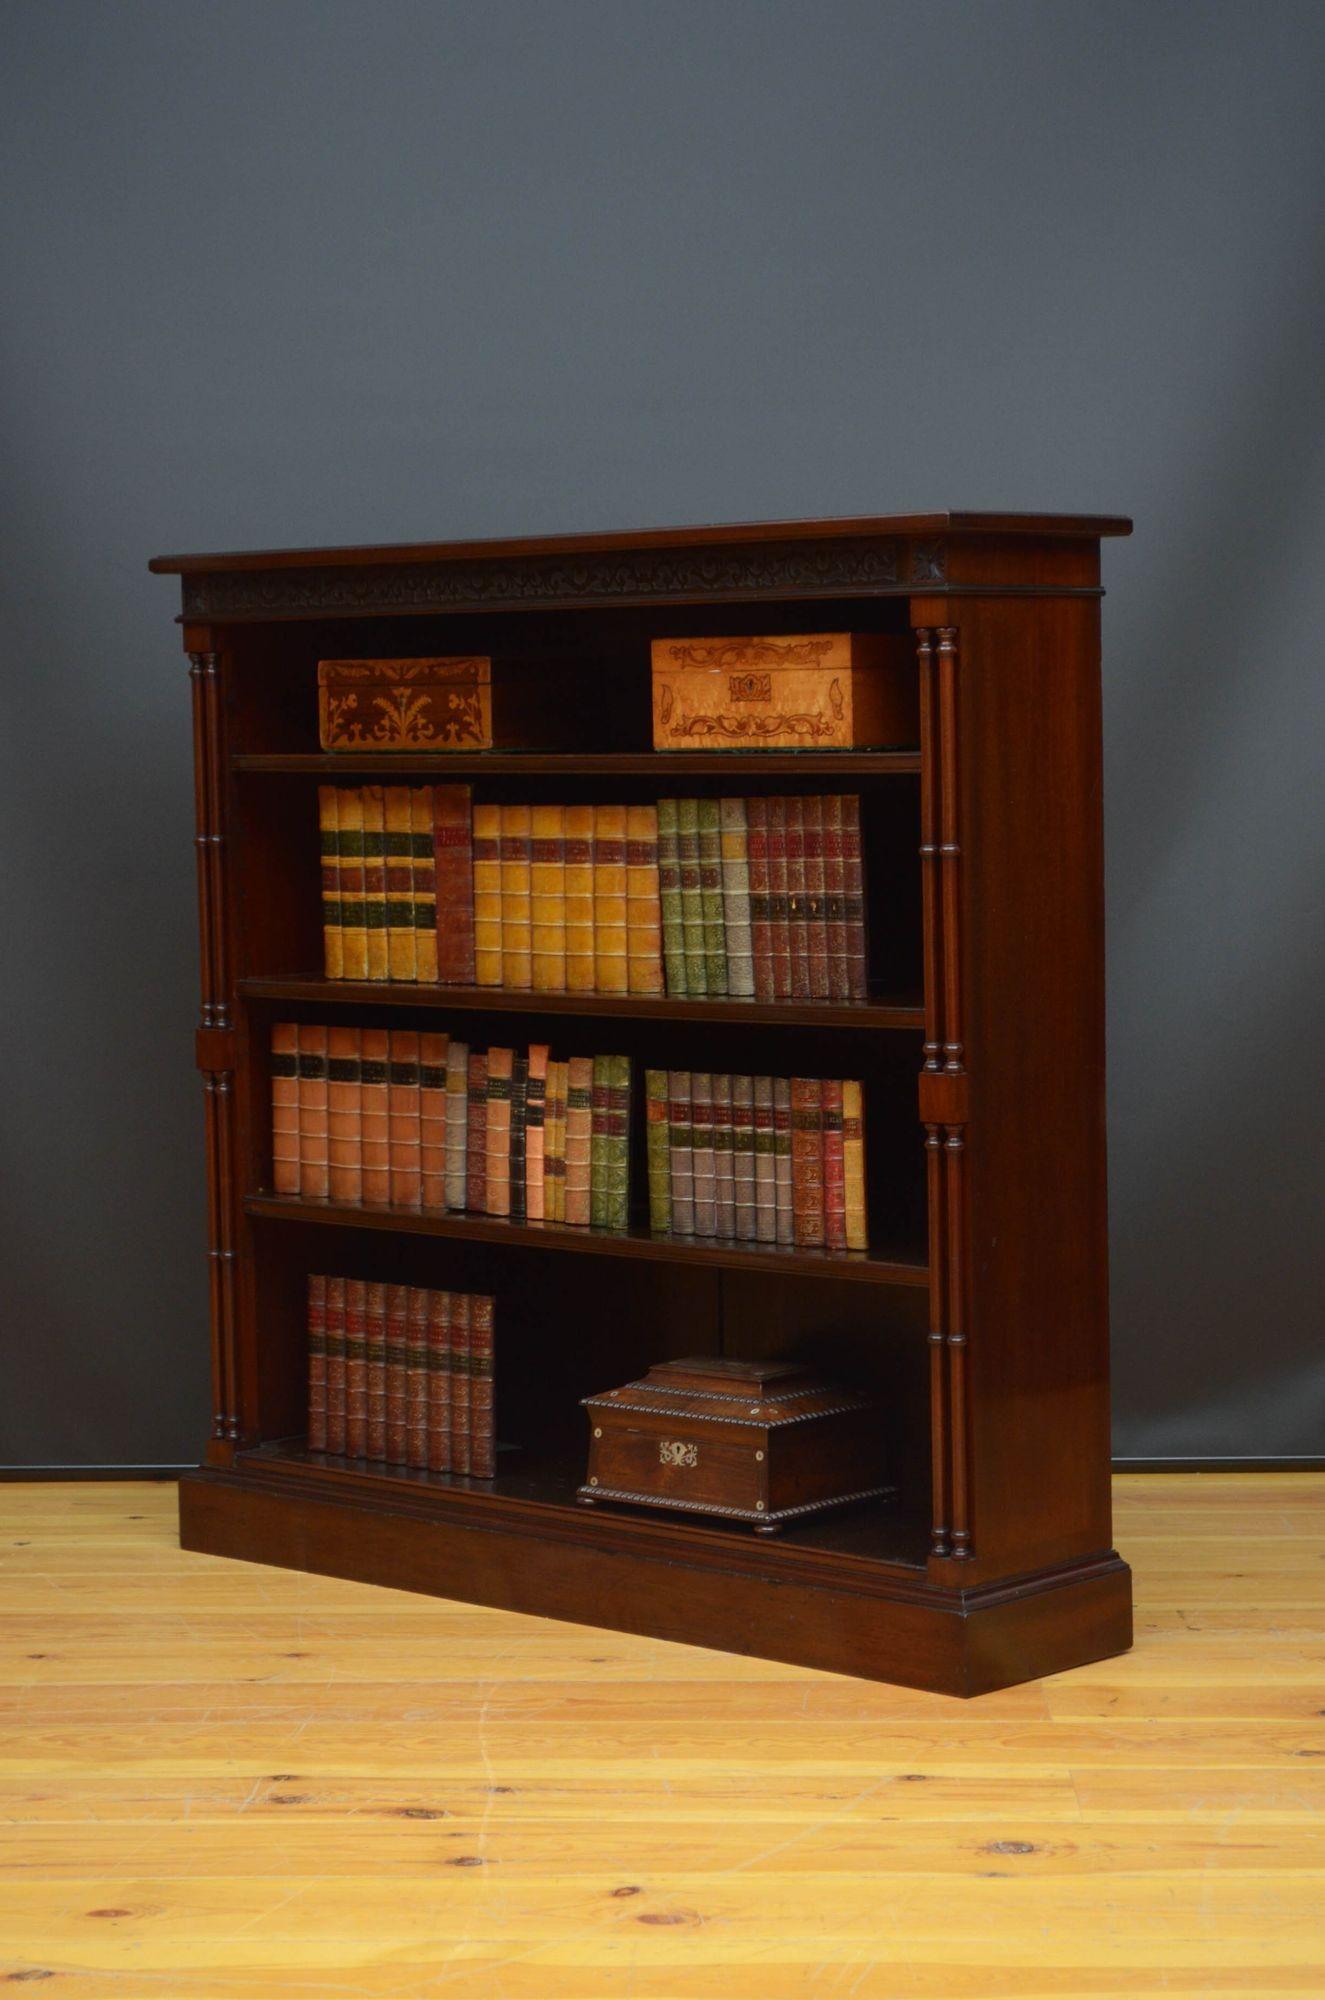 Sn5376 A fine quality Chippendale Revival open bookcase in mahogany, having oversailing top above blind fretwork to the frieze and an open section with three height adjustable shelves, all flamed by slender double columns, standing on moulded plinth